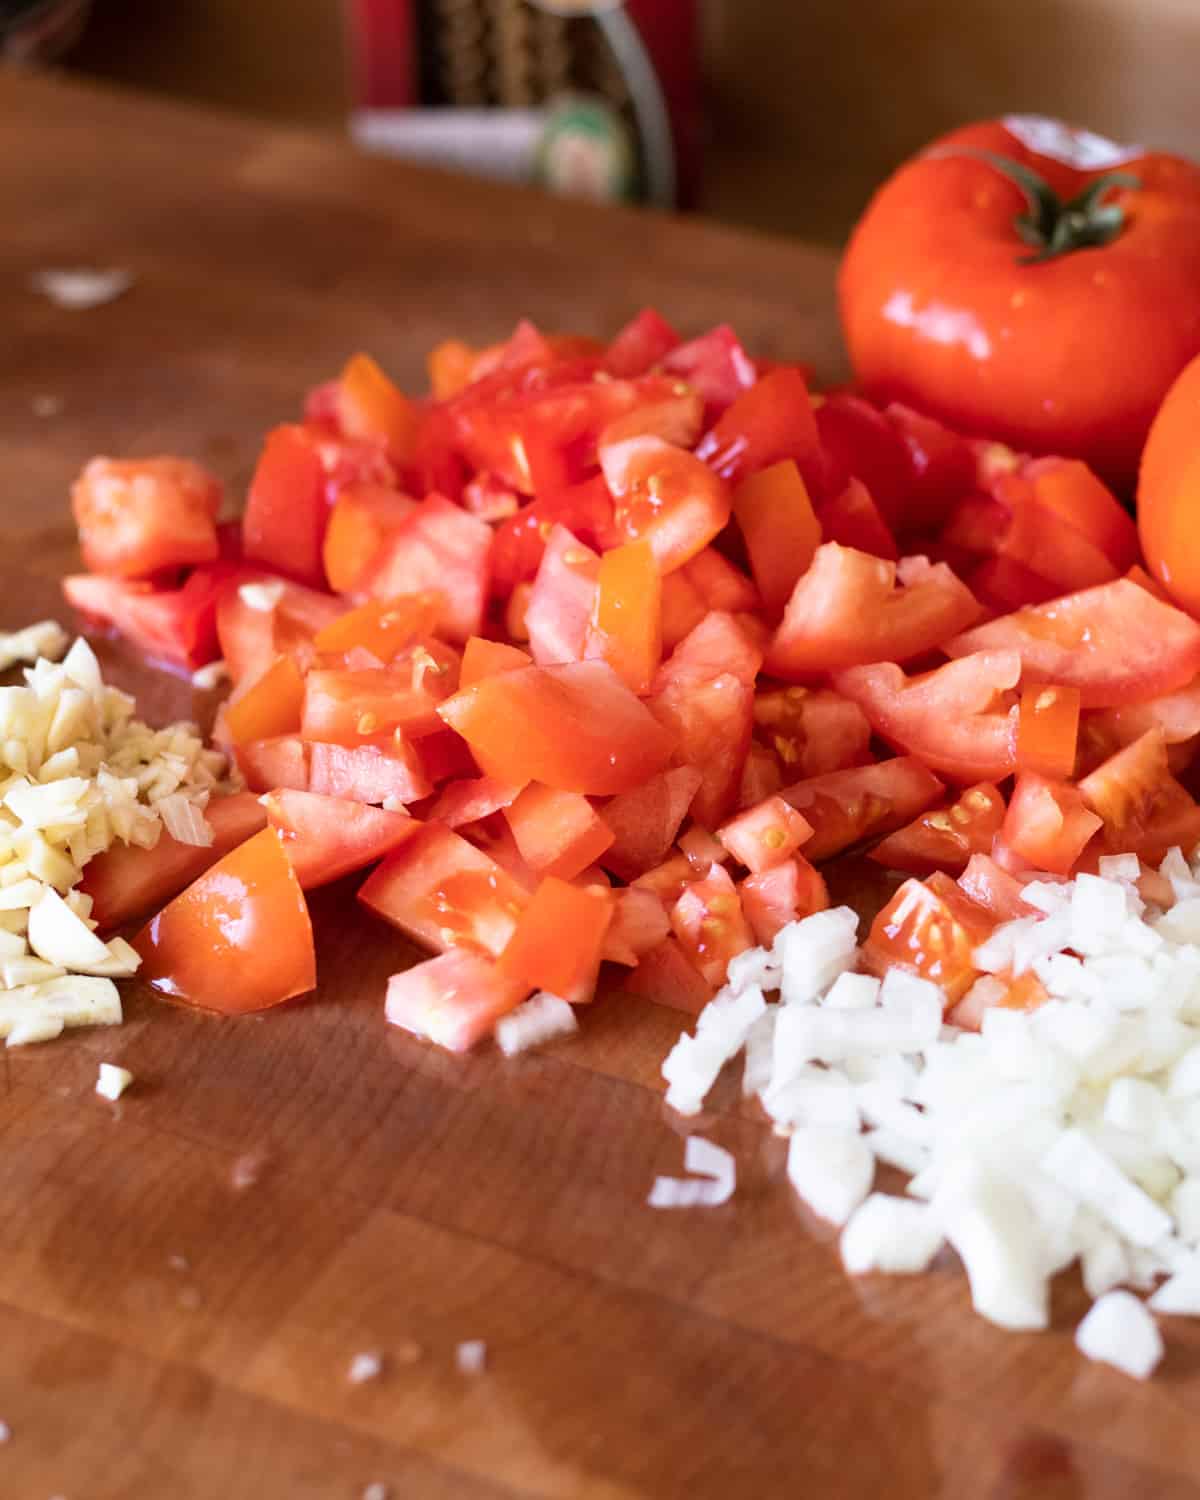 Close up image of a cutting board with cut fresh tomatoes, onions, and fresh garlic. The image is for a recipe post on how to make lasagna